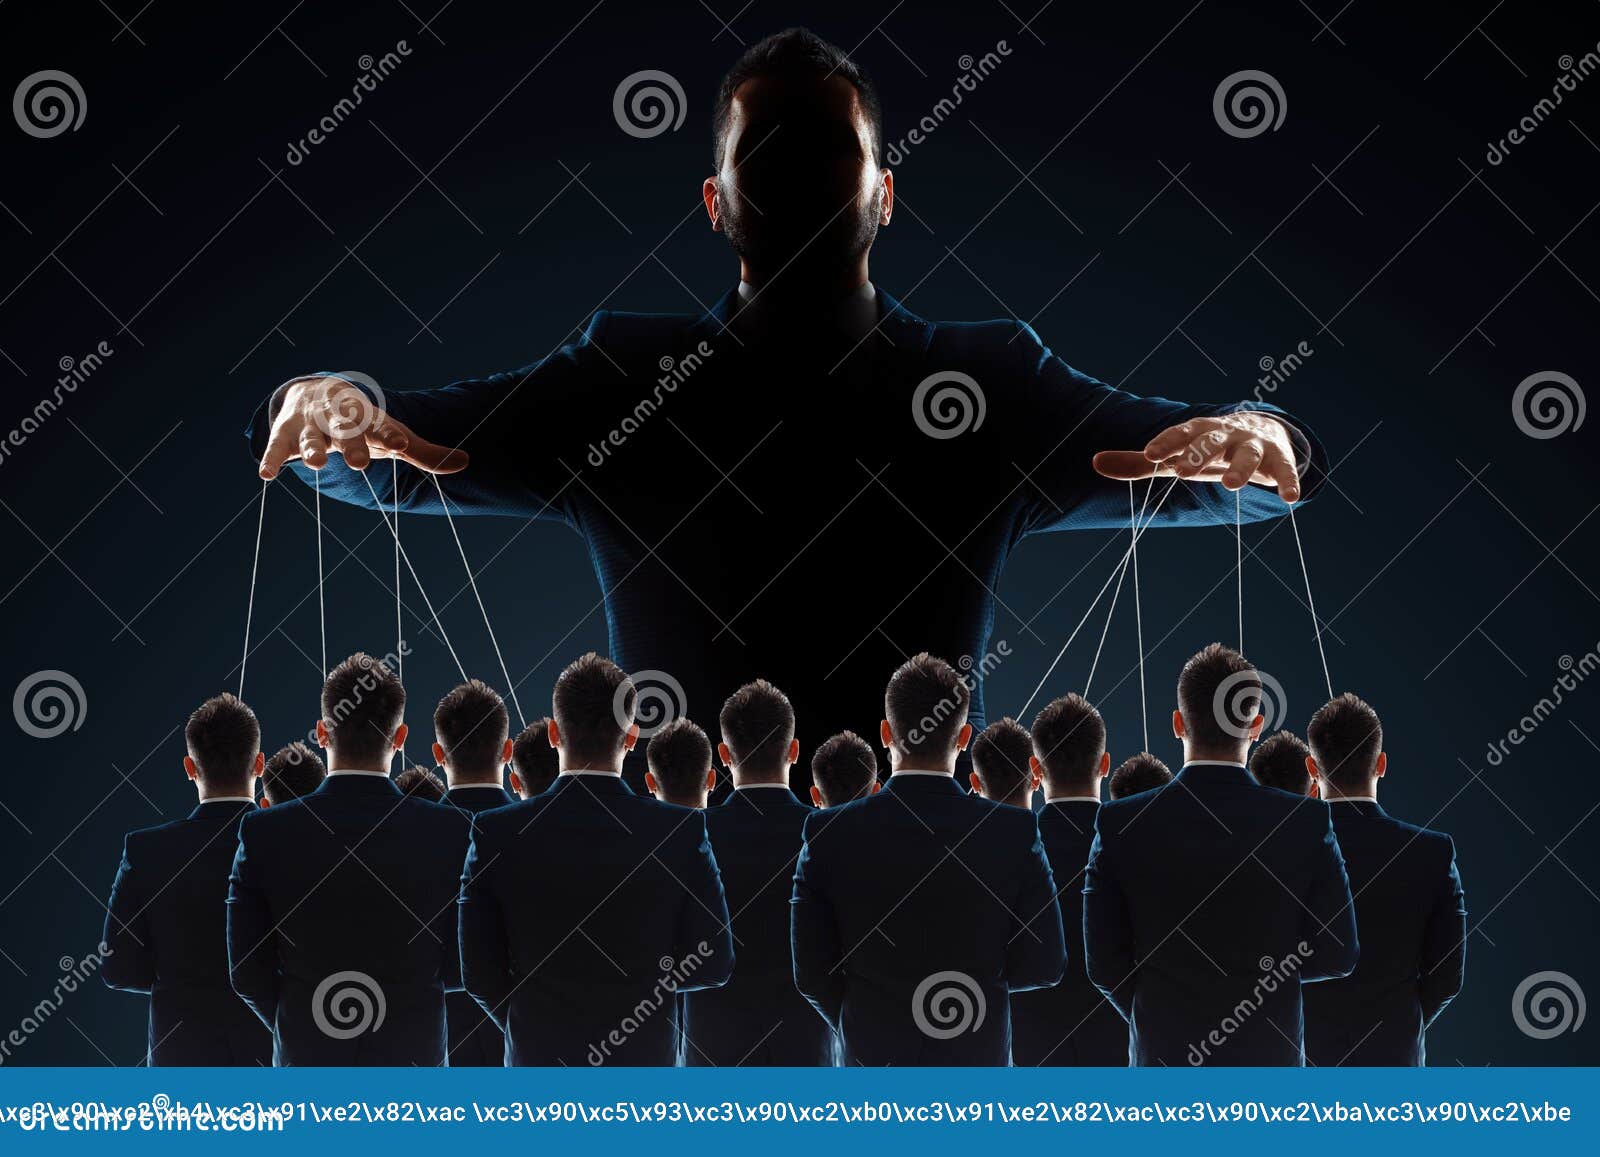 a man, a puppeteer, controls the crowd with threads. the concept of world conspiracy, world government, manipulation, world